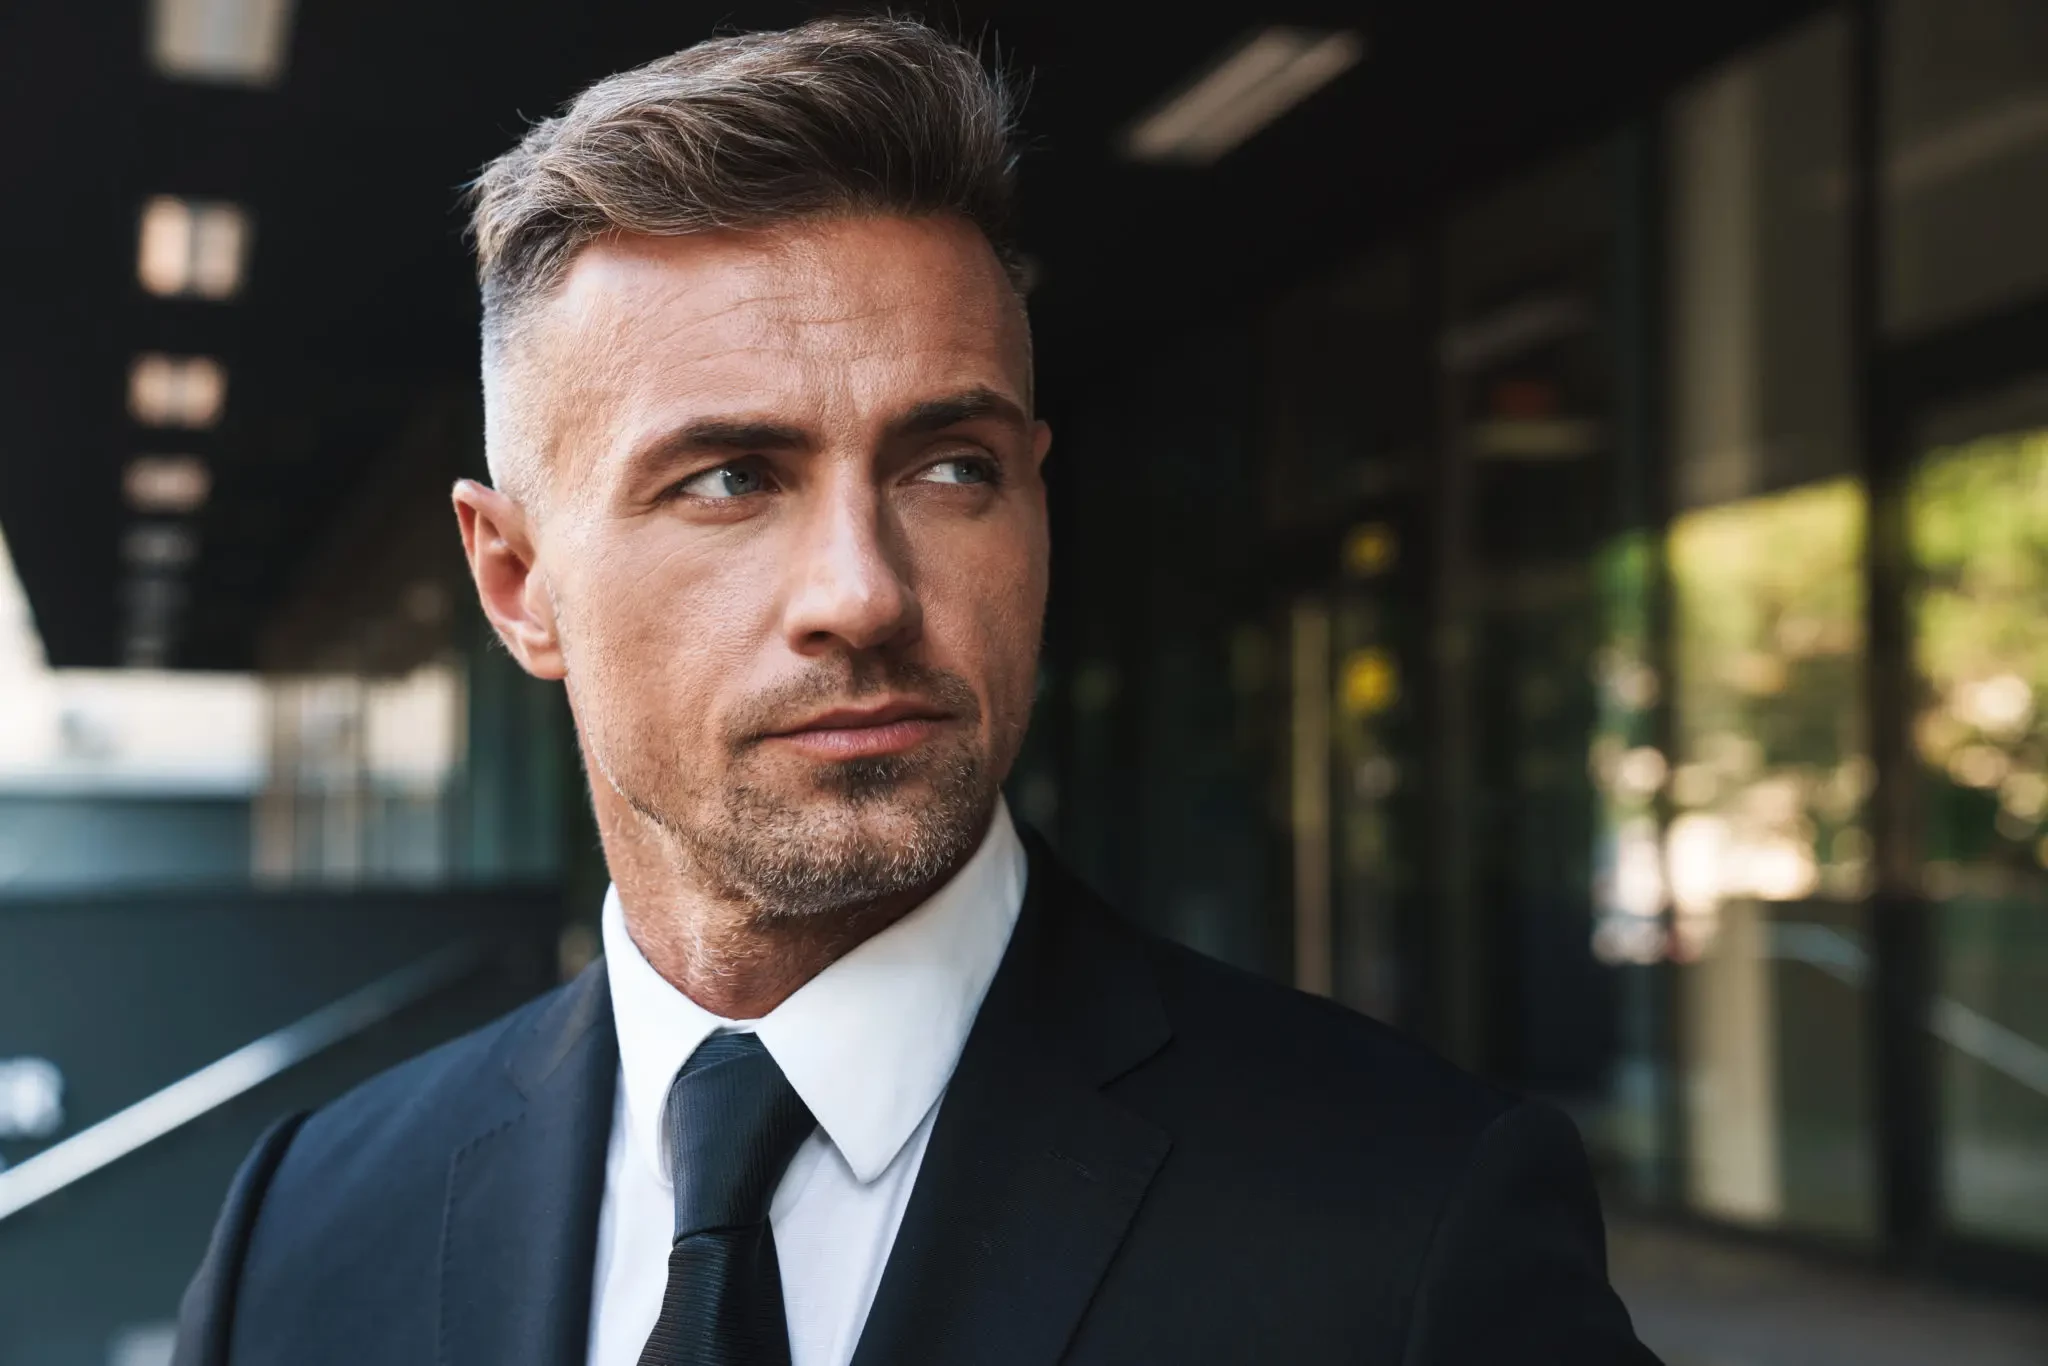 Why an Attractive Chiseled Jawline is a Key to Masculine Beauty